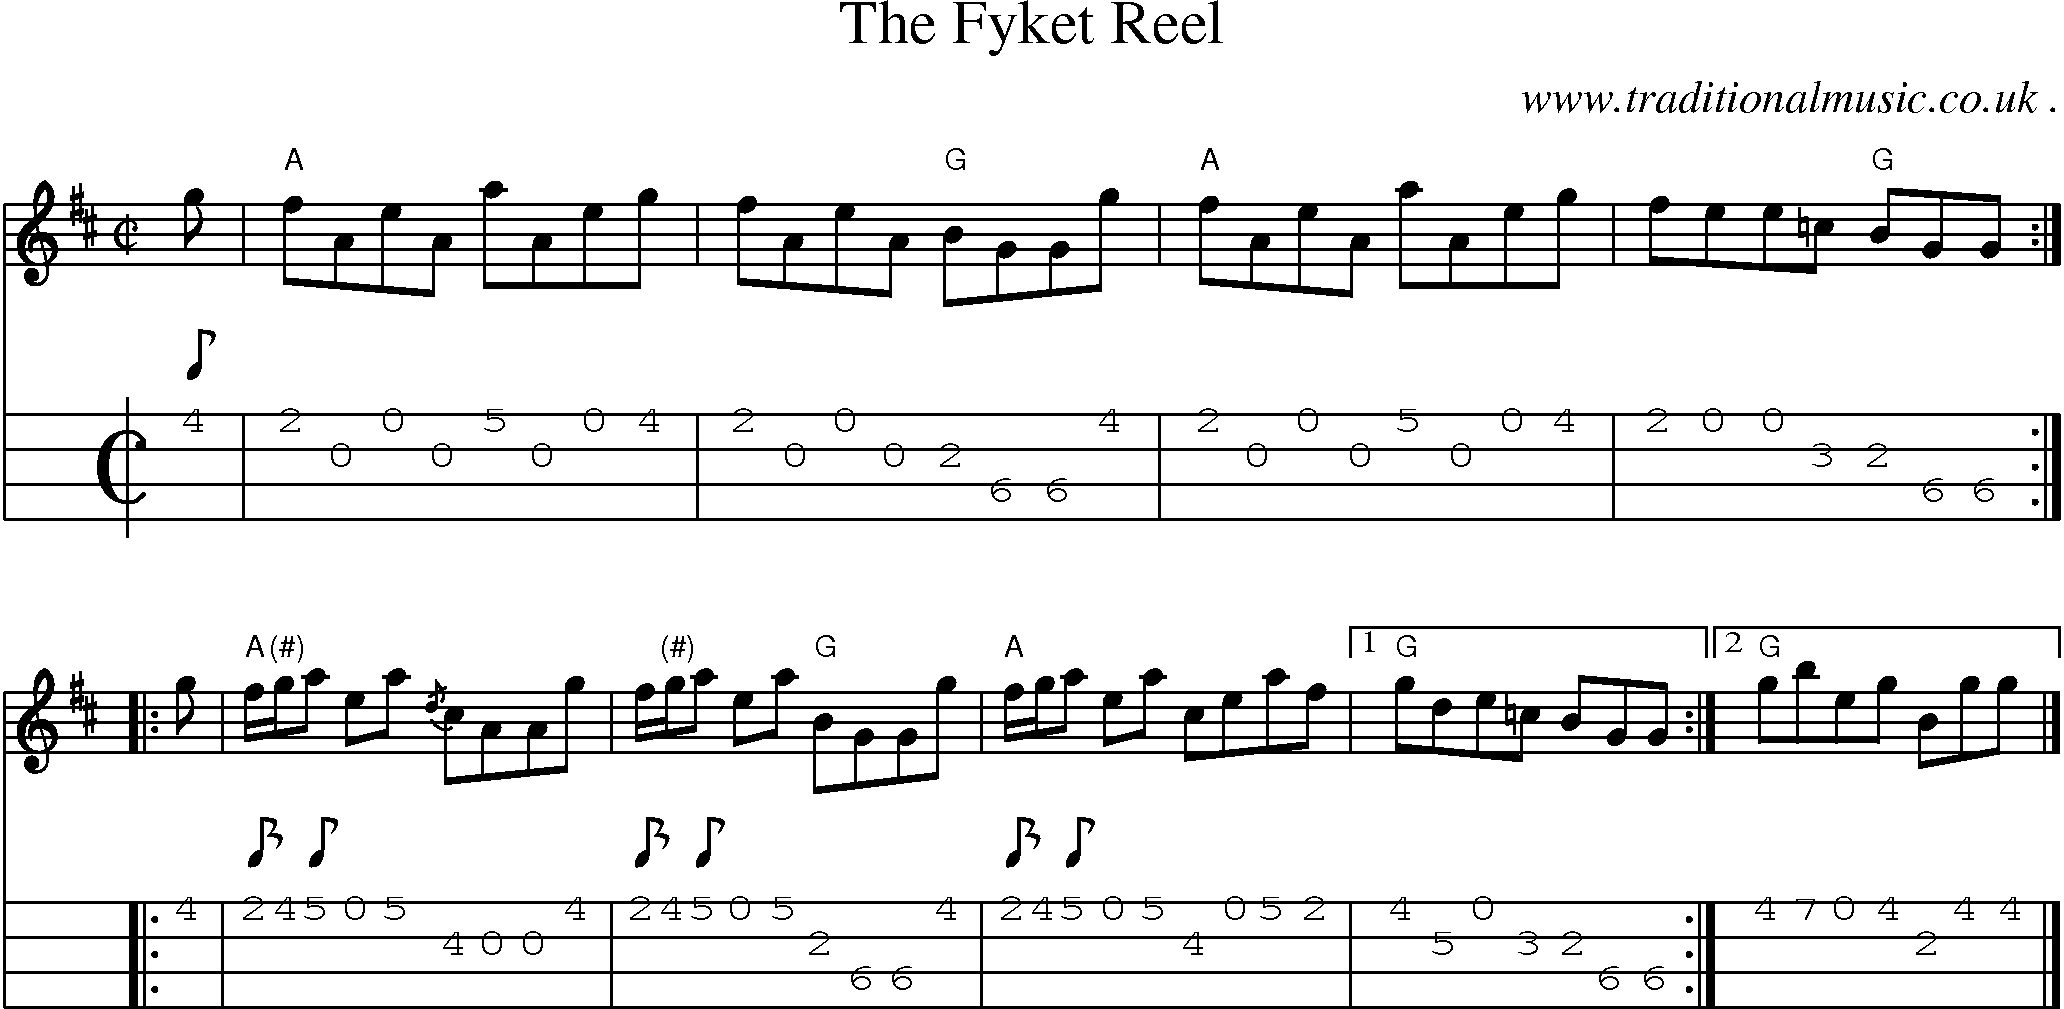 Sheet-music  score, Chords and Mandolin Tabs for The Fyket Reel